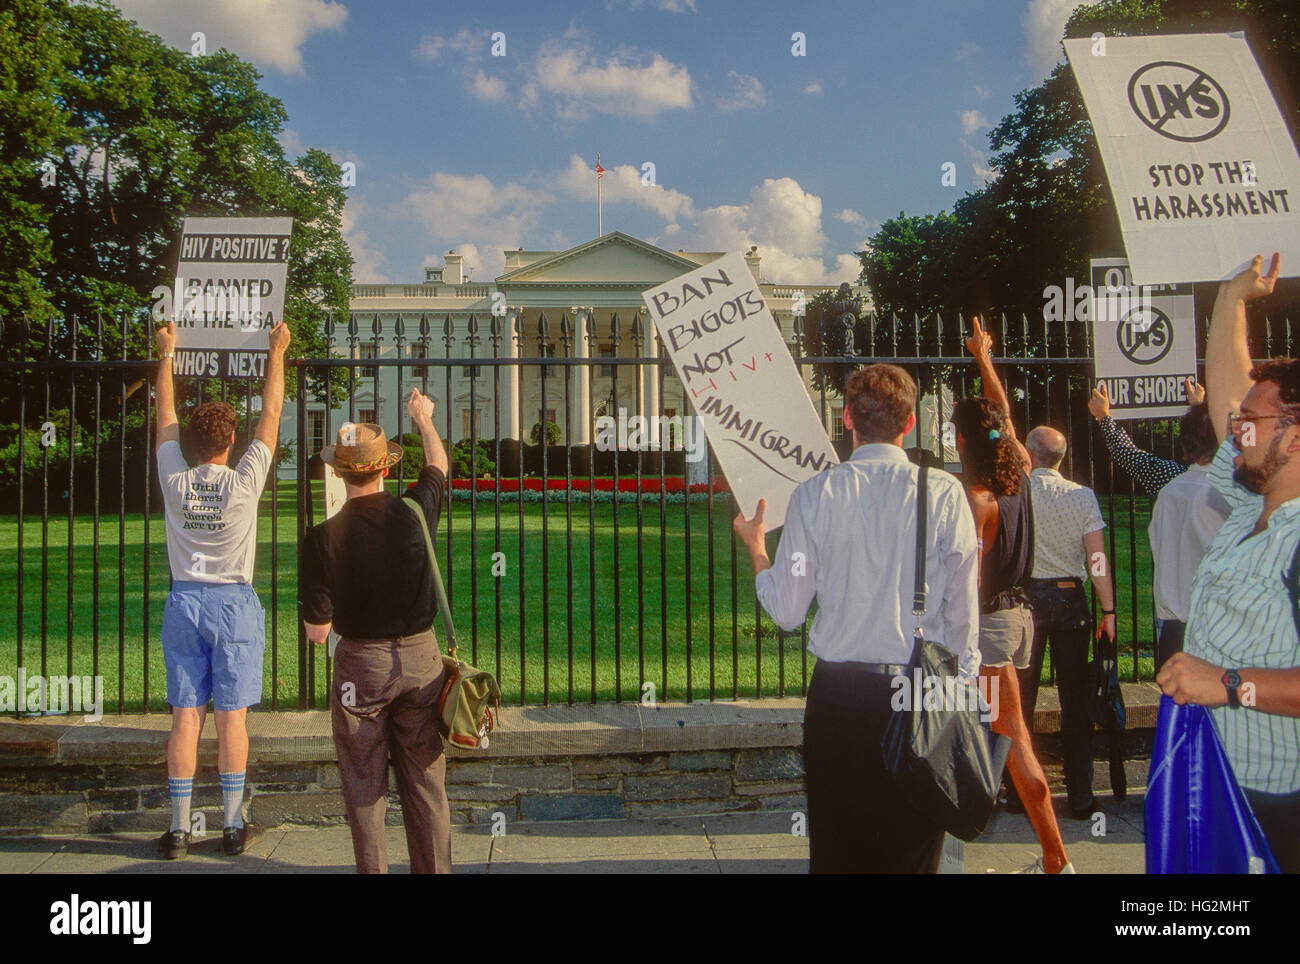 Washington, DC., USA, 30th September, 1991 Protesters from the group 'ACT UP' block the entrance to the Northwest Gate of the White House during a protest about the lack of funding for research into the cause of the AIDS/HIV disease. Credit: Mark Reinstein Stock Photo